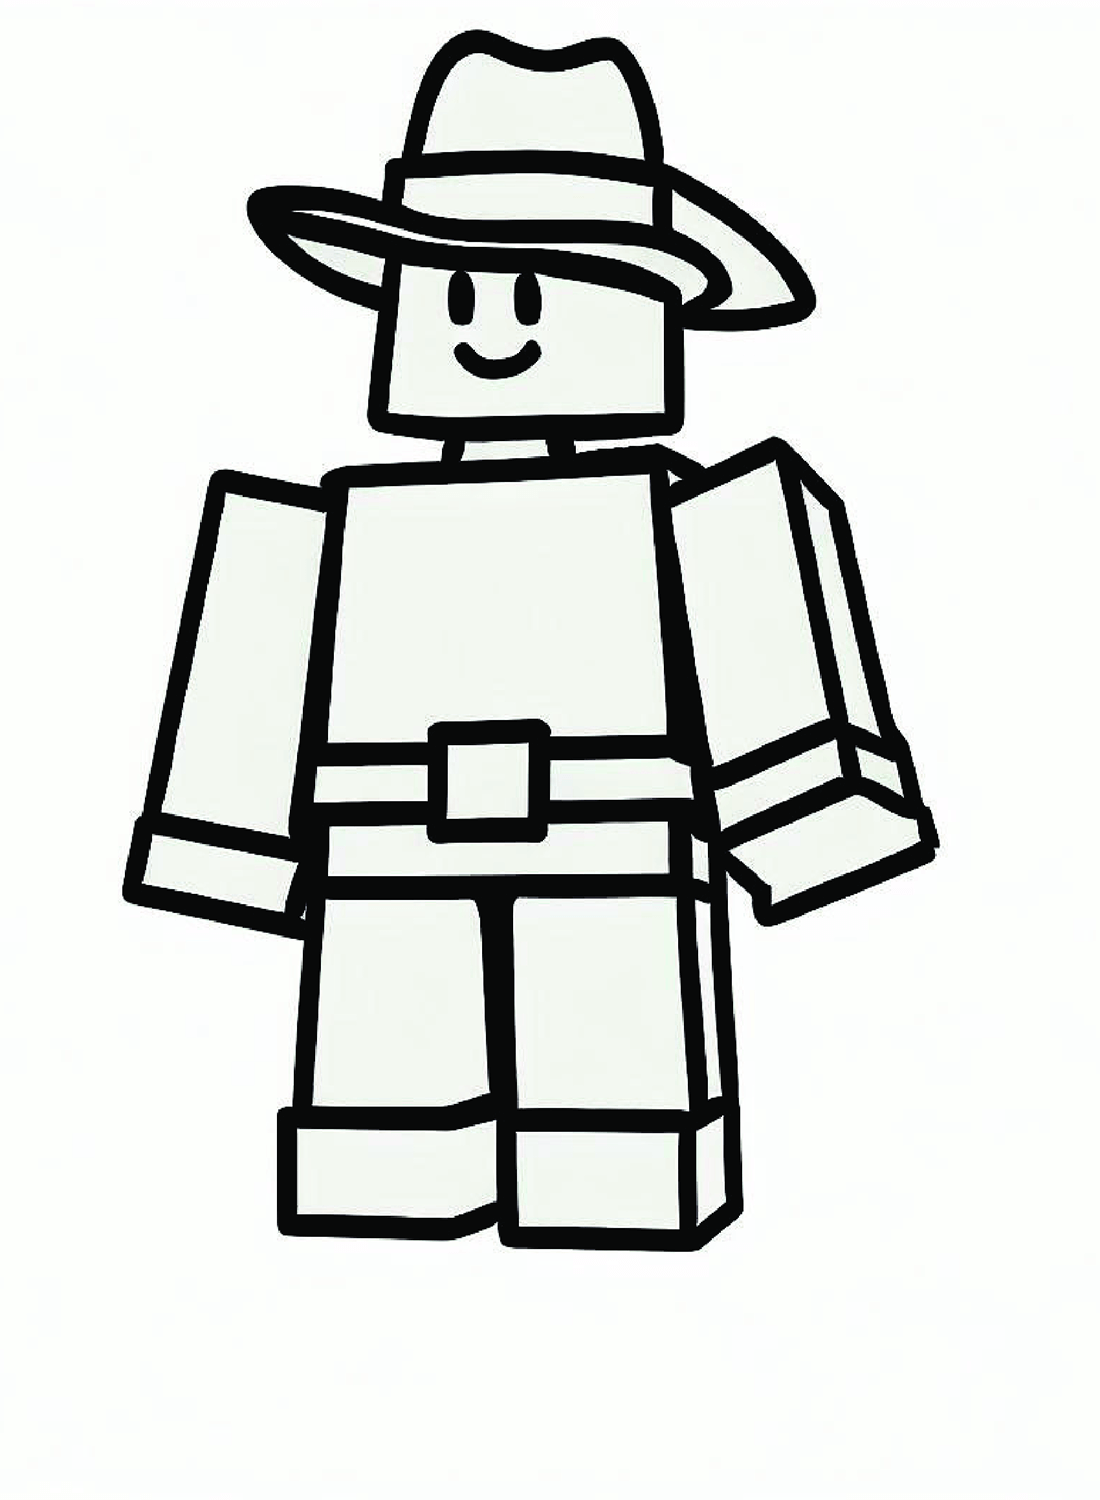 Coloring Page Roblox from Roblox